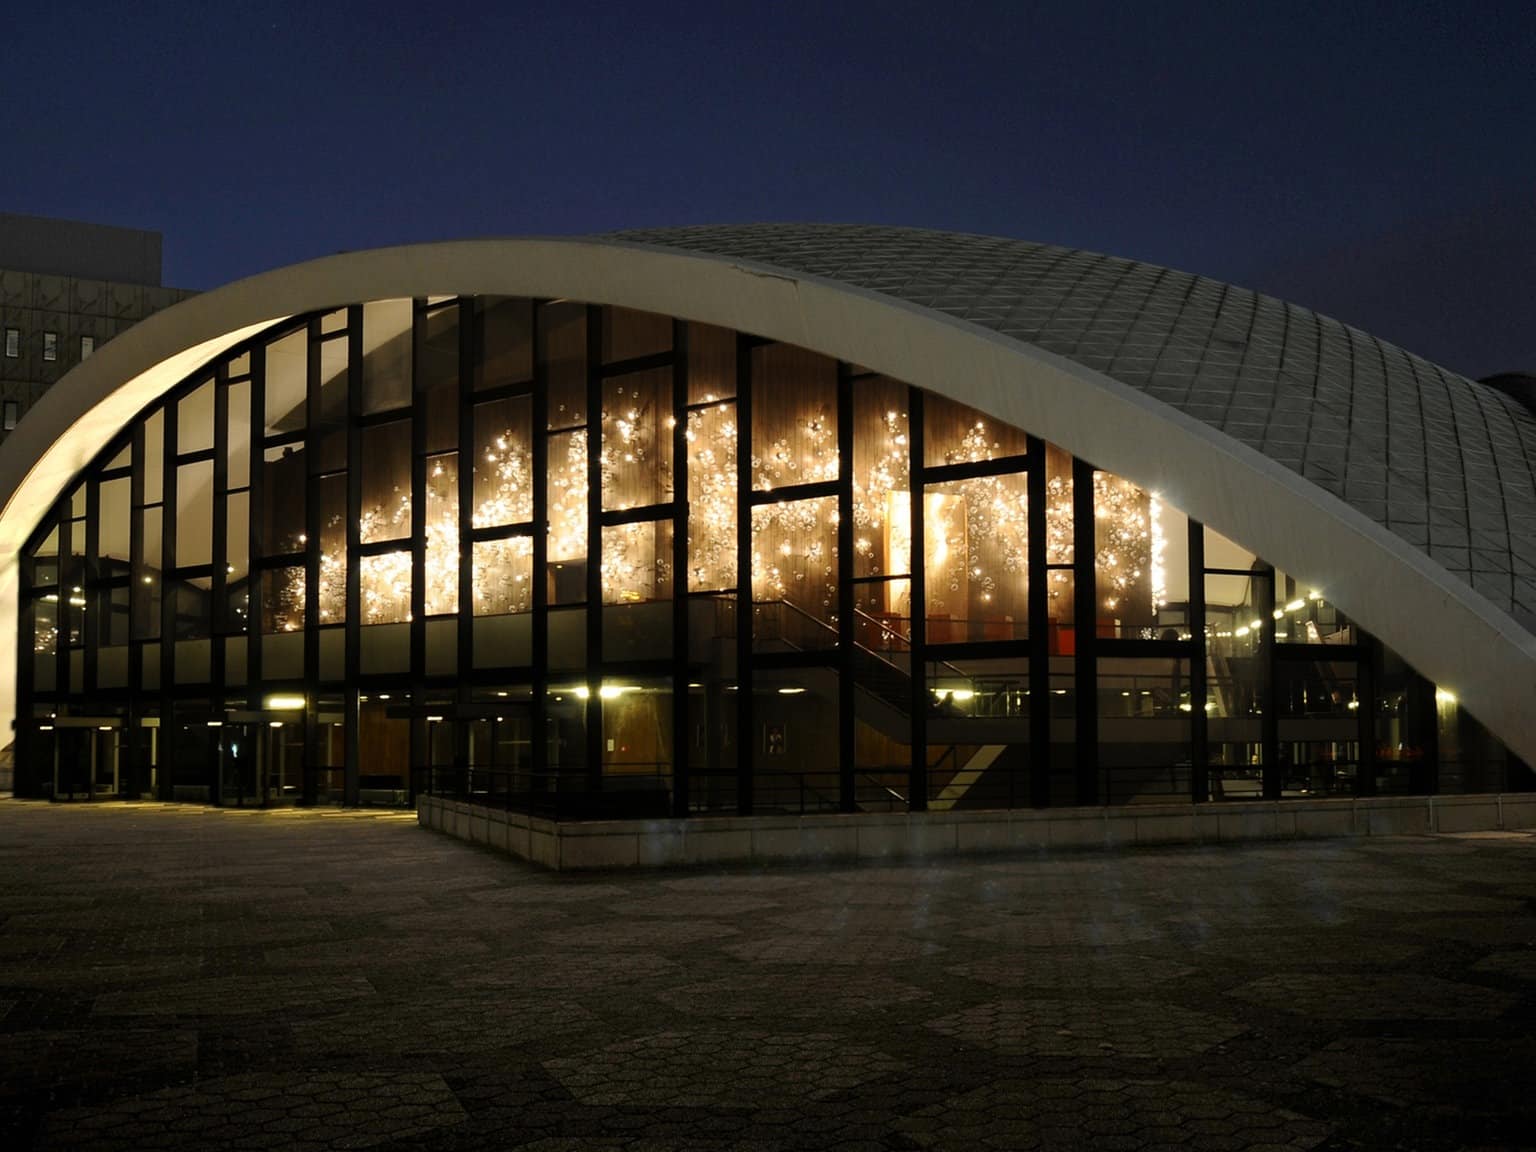 And the world’s best opera house is … Dortmund